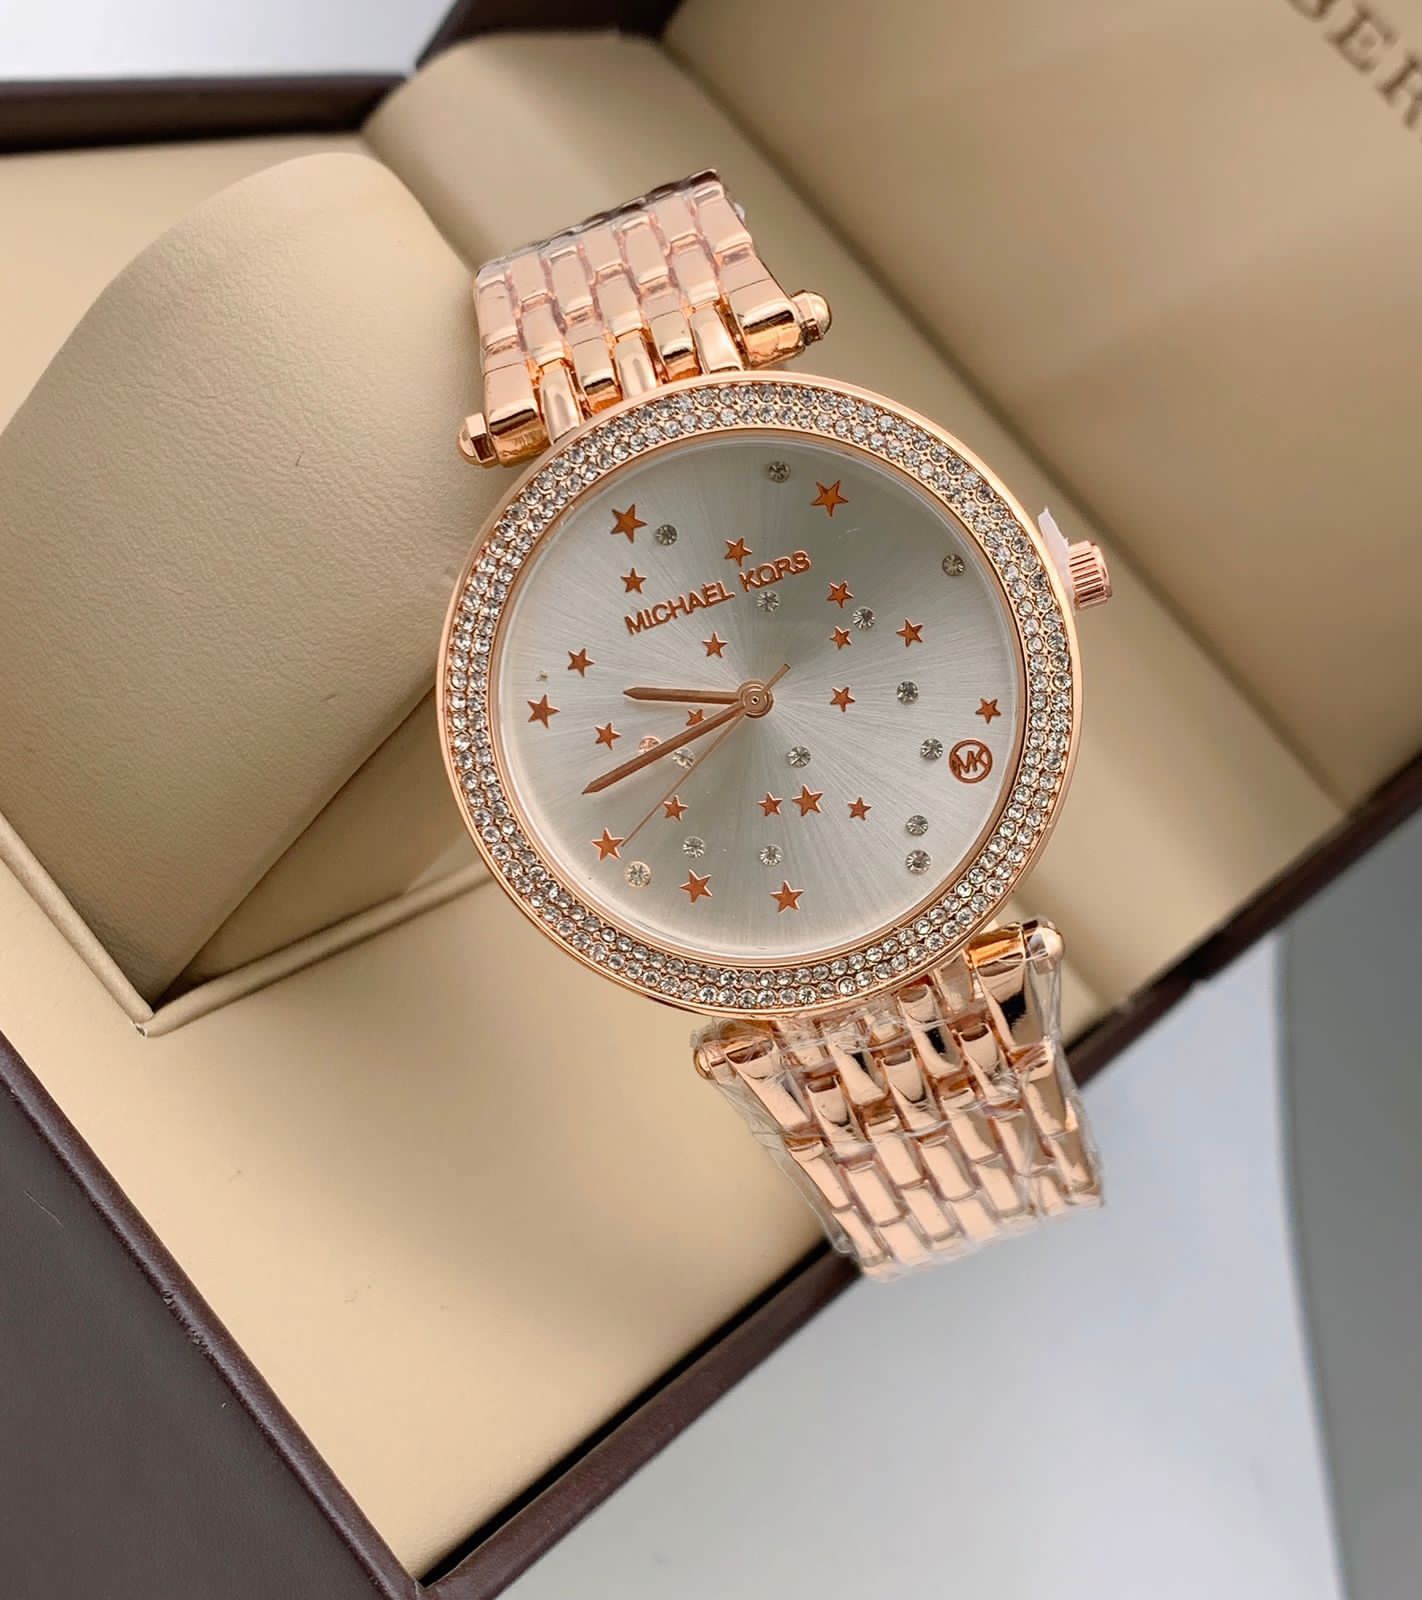 Michael Kors Golden Color Metal Diamond Case & Strap Watch For Women's MK-3726 Design Silver Dial For Girl Or Woman Best Gift Date Watch